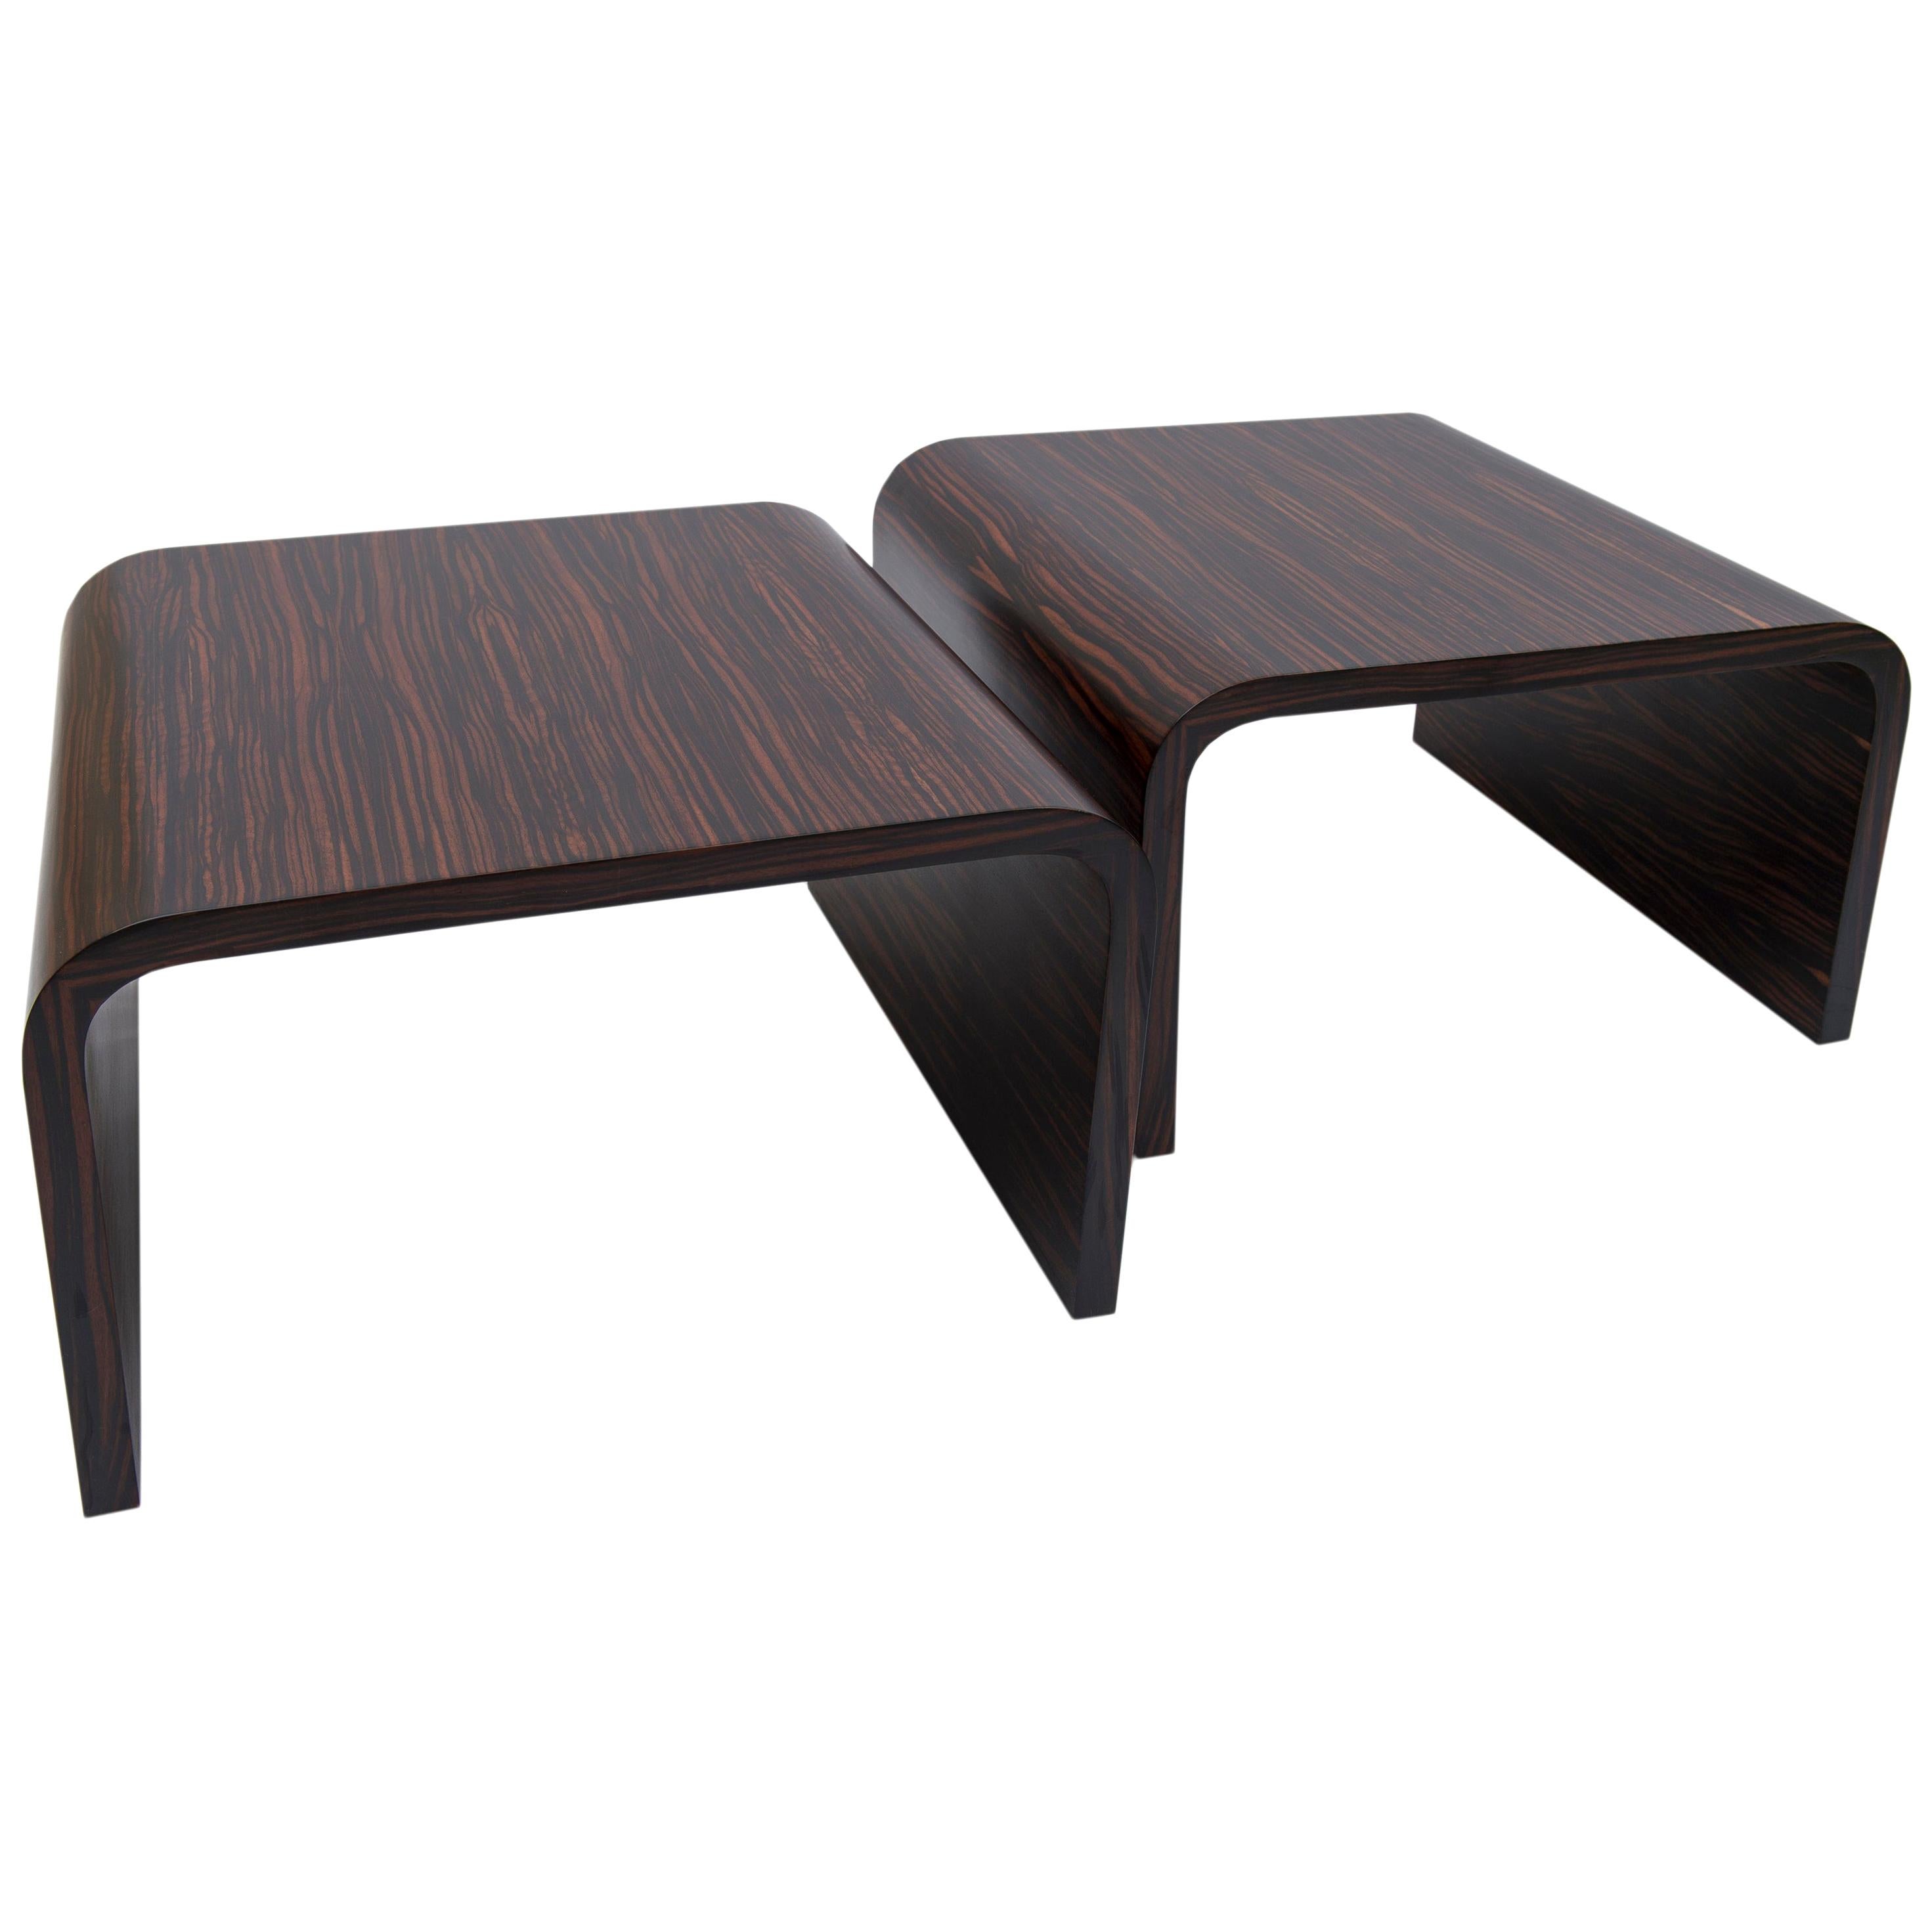 Macassar Ebony Side Tables For Sale